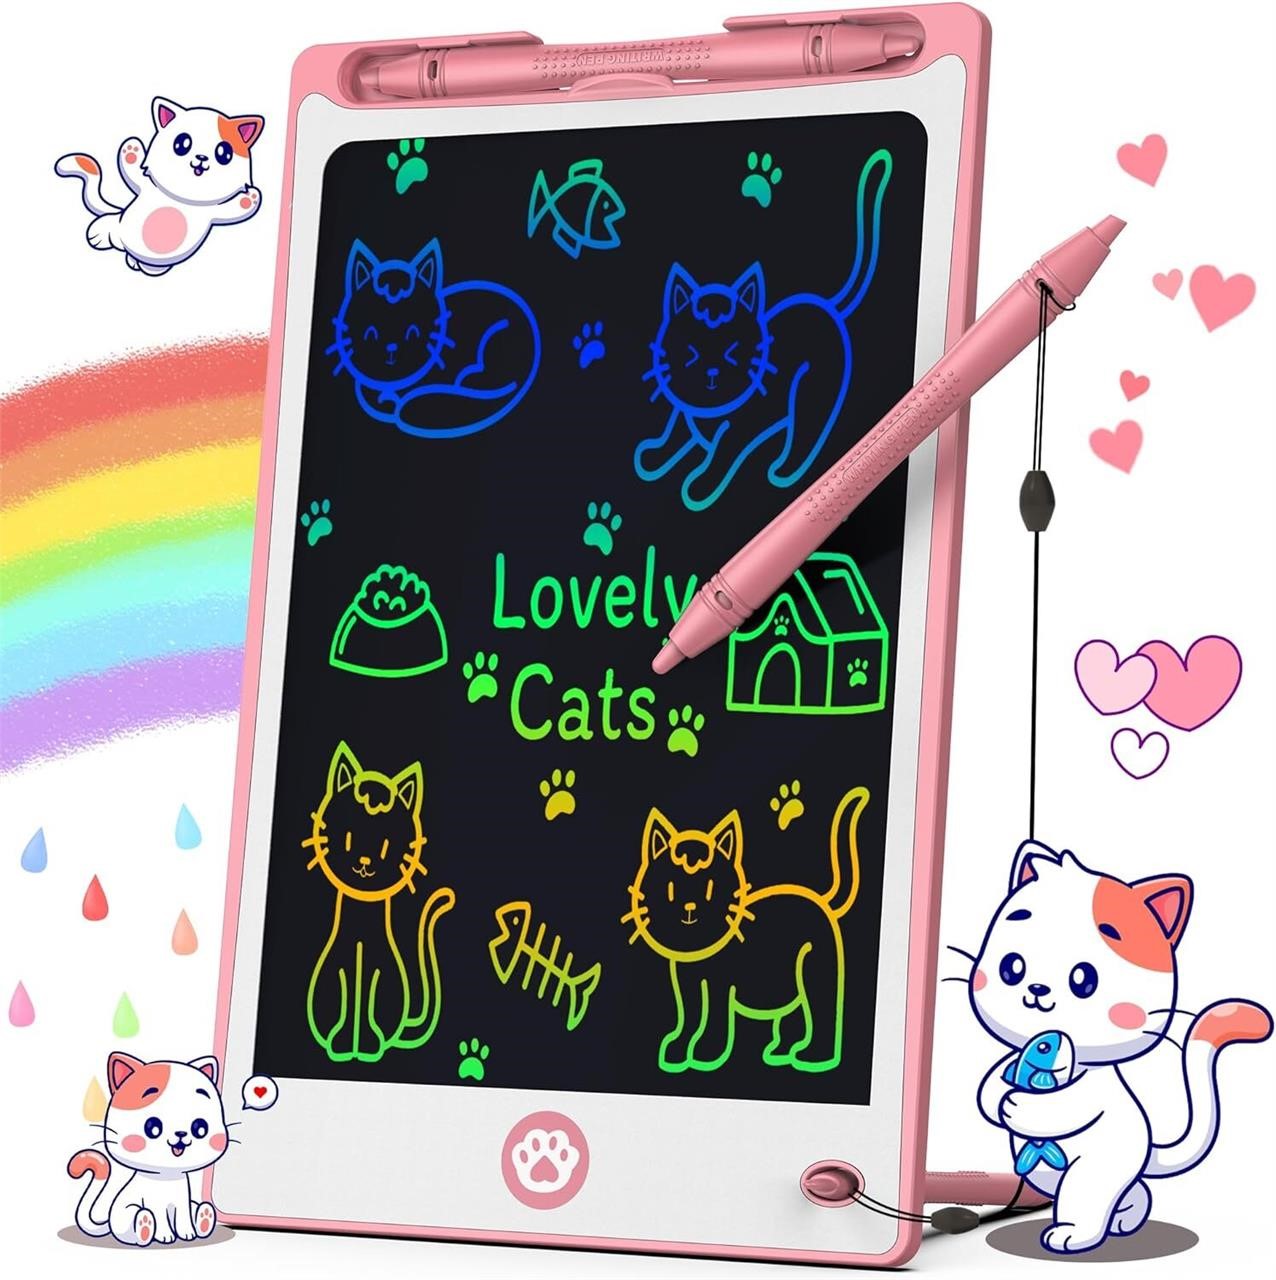 Hockvill LCD Writing Tablet for Kids 8.8 Inch